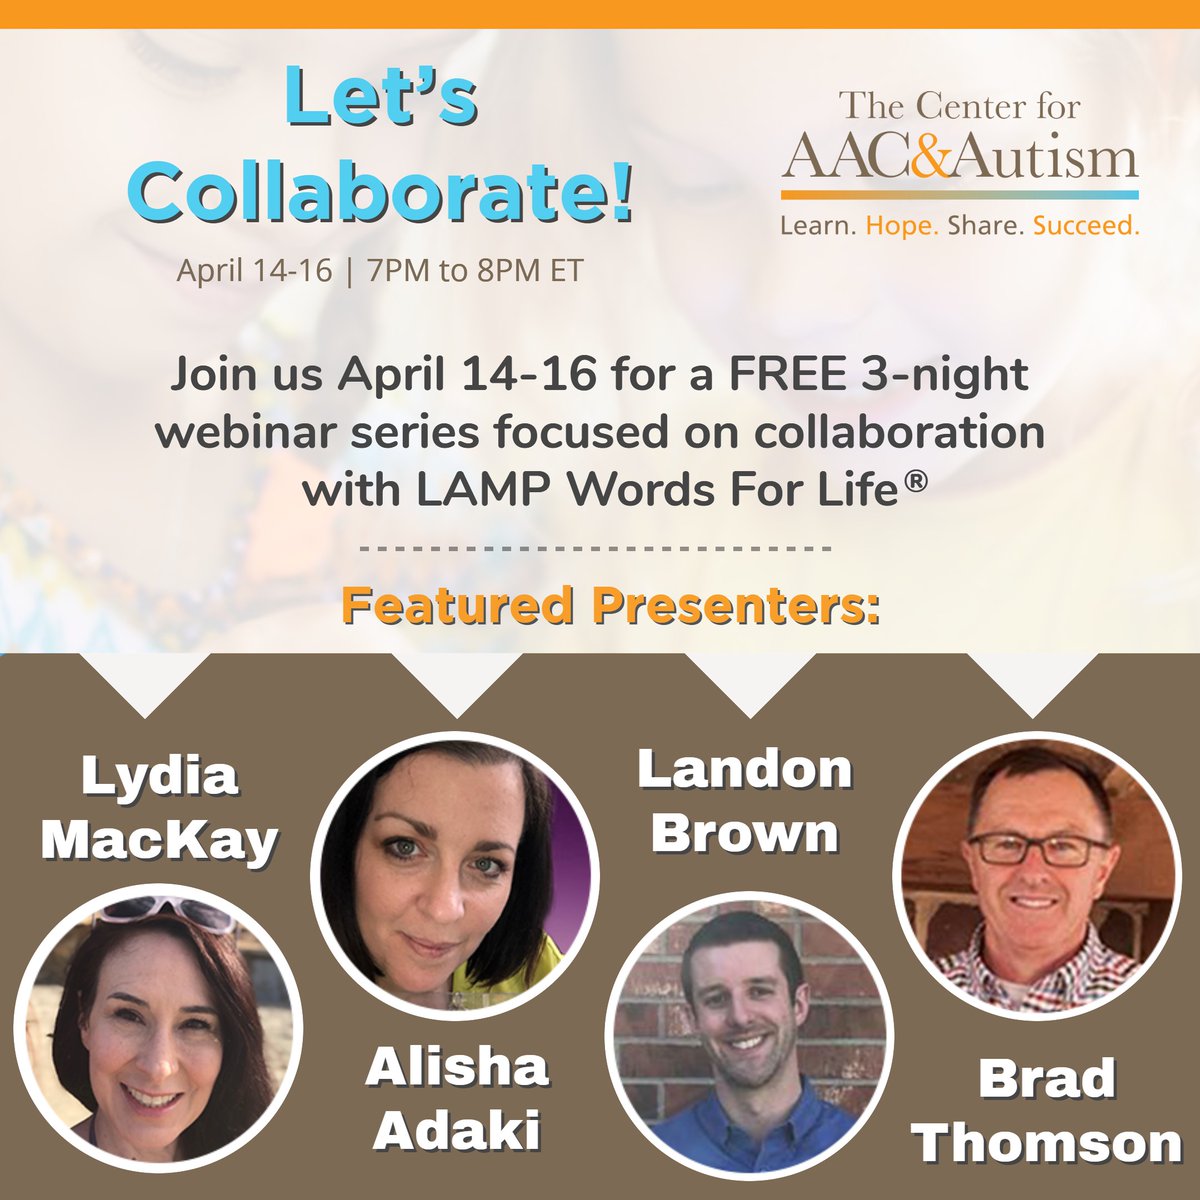 To celebrate Autism Awareness Month, join us April 14-16th for a FREE webinar series! Guest speakers will focus on collaboration among teams using LAMP Words for Life® language system and the LAMP method. #AAC #LAMP Get all the details and sign up here: bit.ly/LAMPLetsCollab